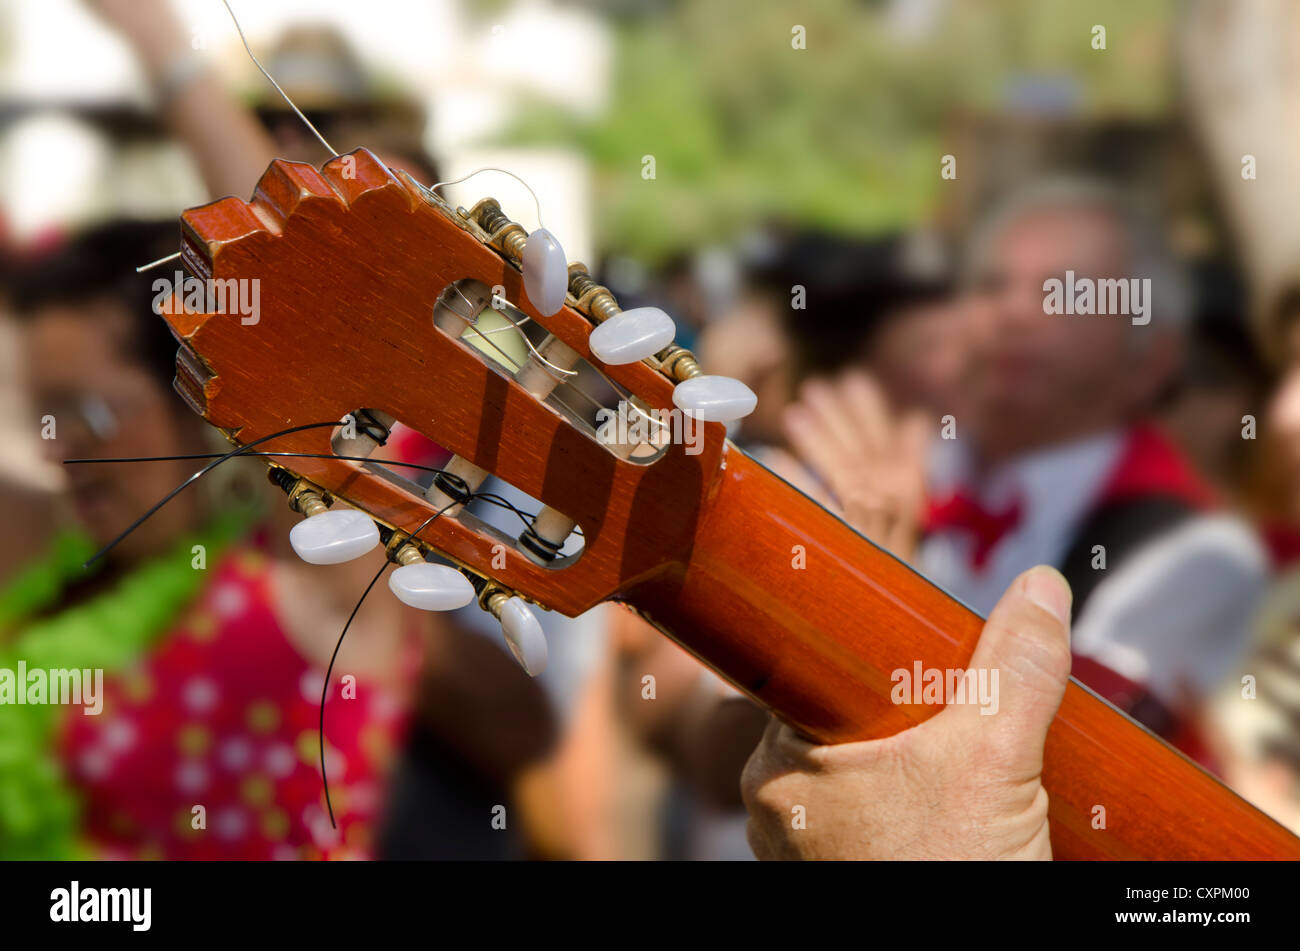 Neck of a Spanish guitar with dancing spaniards in the background in traditional clothing Spain. Stock Photo